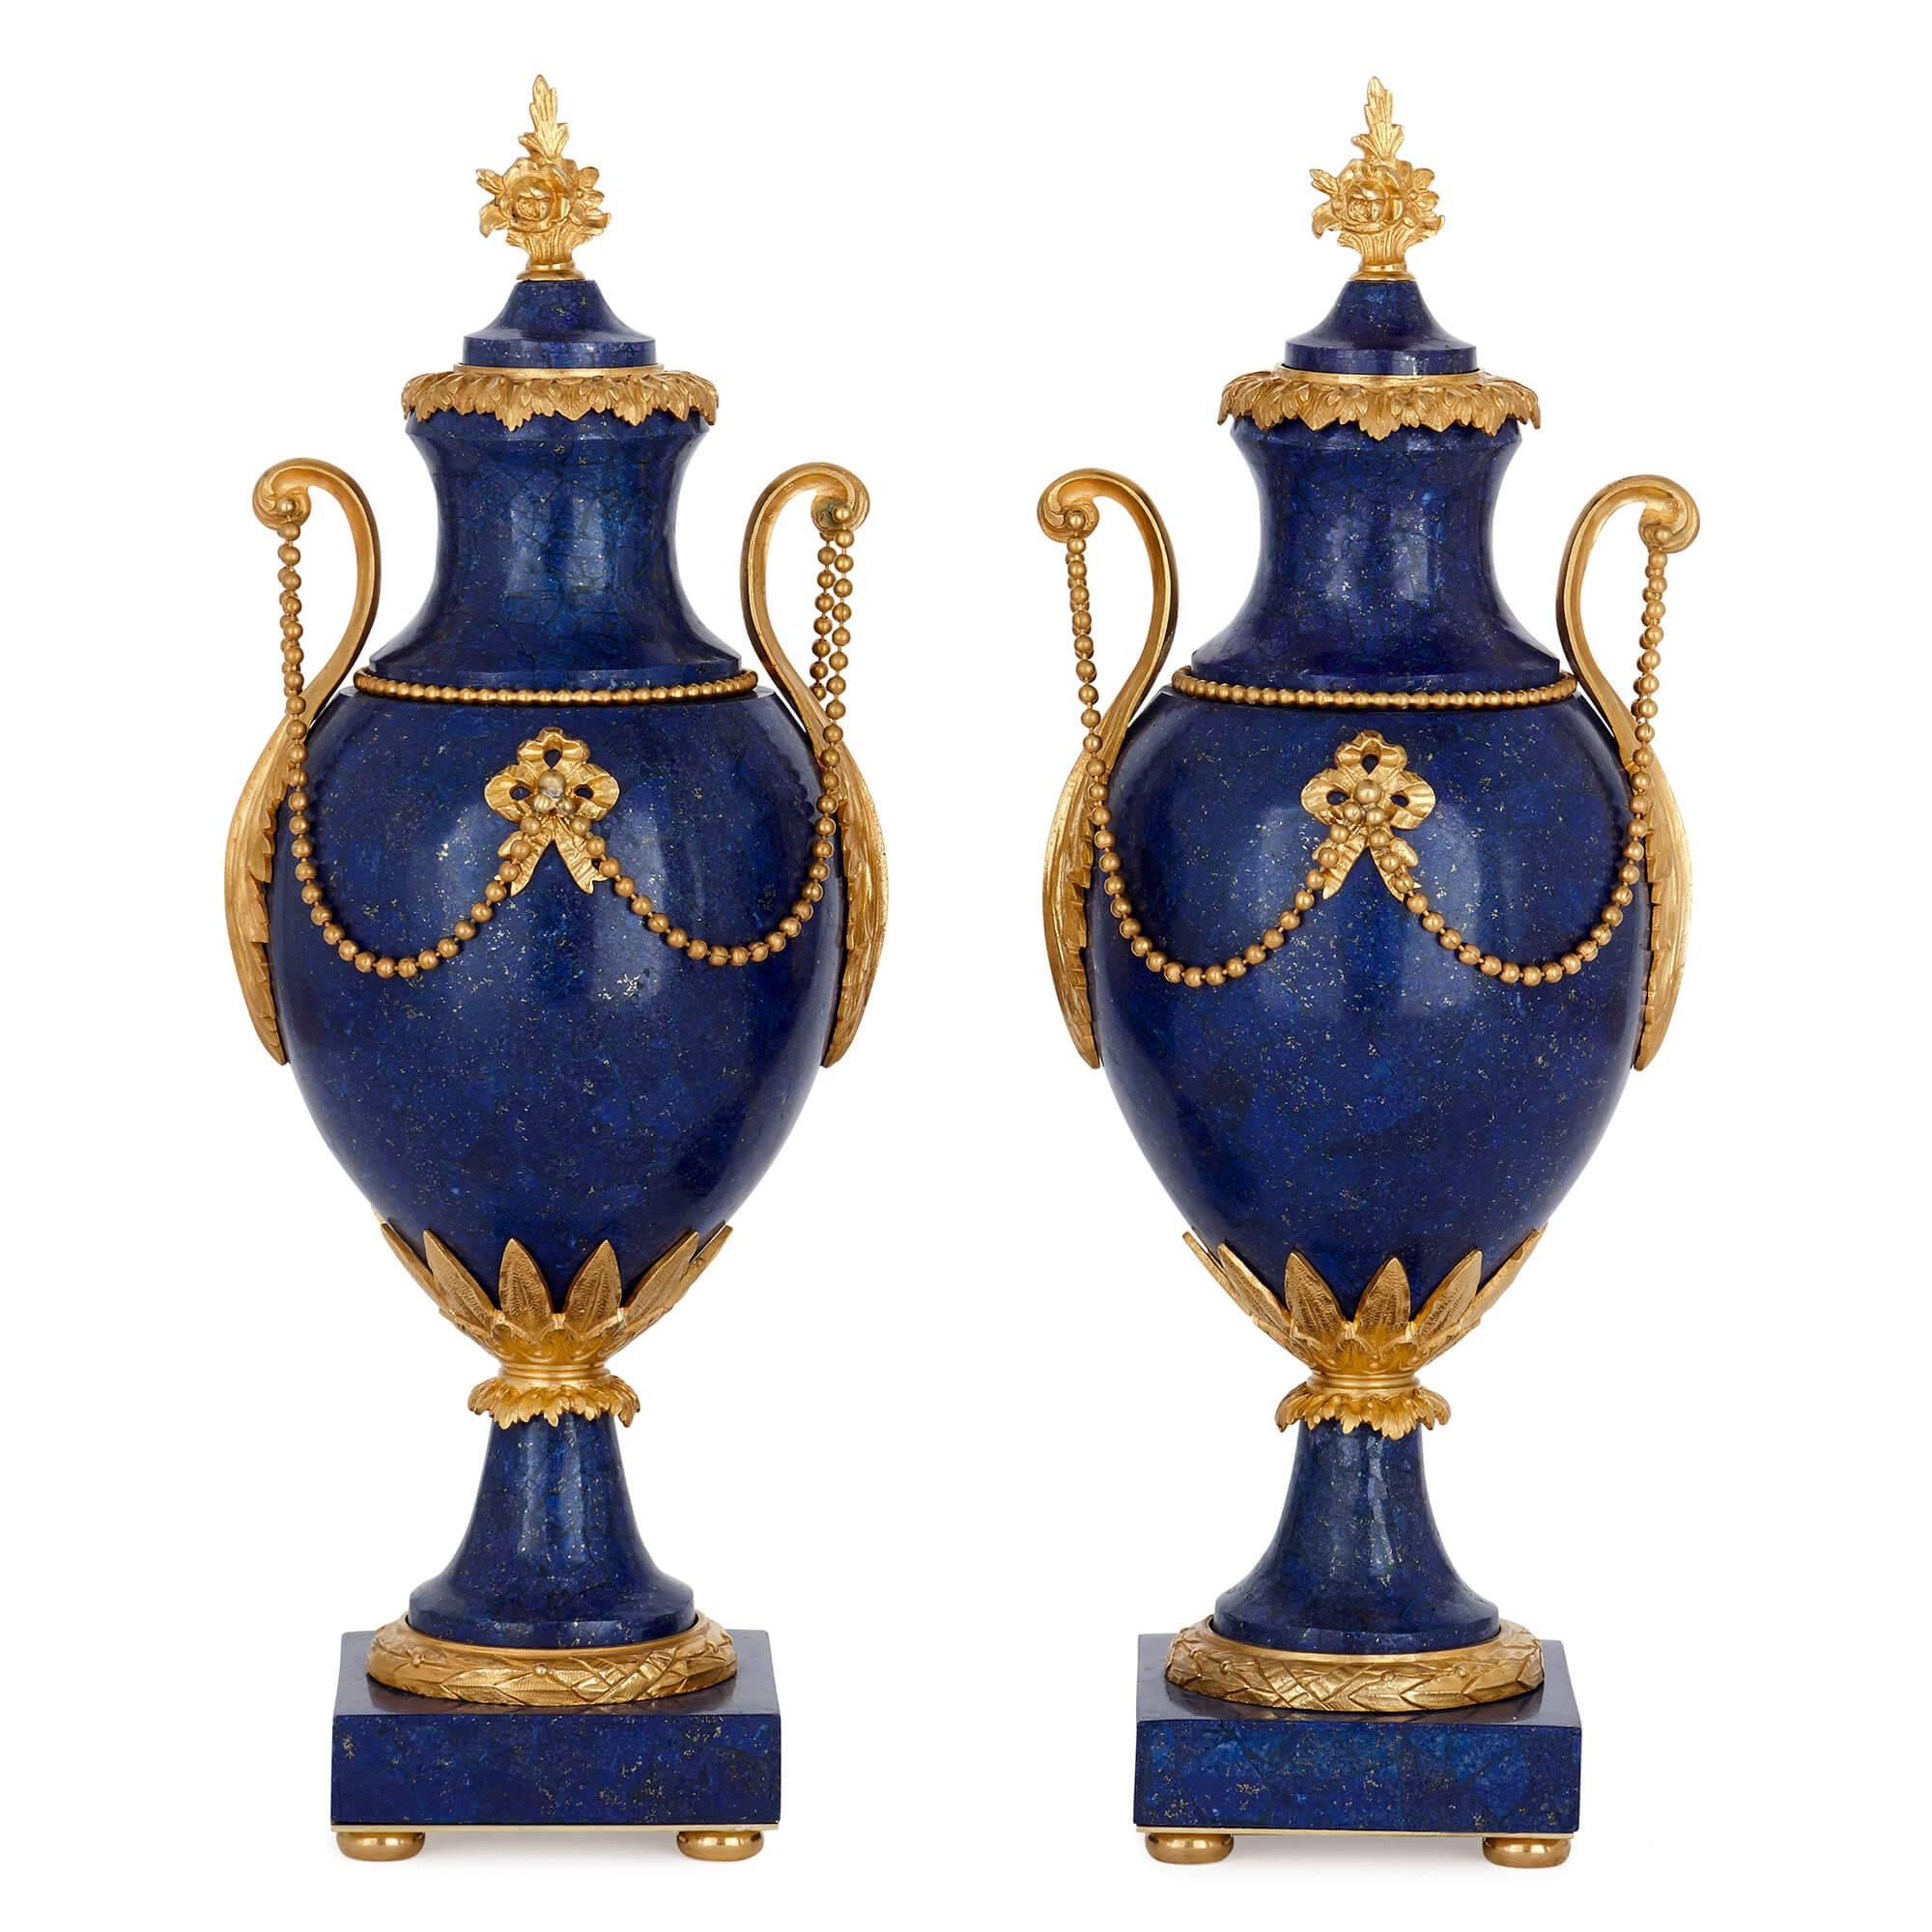 These exquisite vases are crafted in sumptuous materials, combining gleaming gilt bronze with the cool blue lapis lazuli. The vases date originally to the early 20th century, with the lapis lazuli veneer being a later addition. 

Of ovoid form,